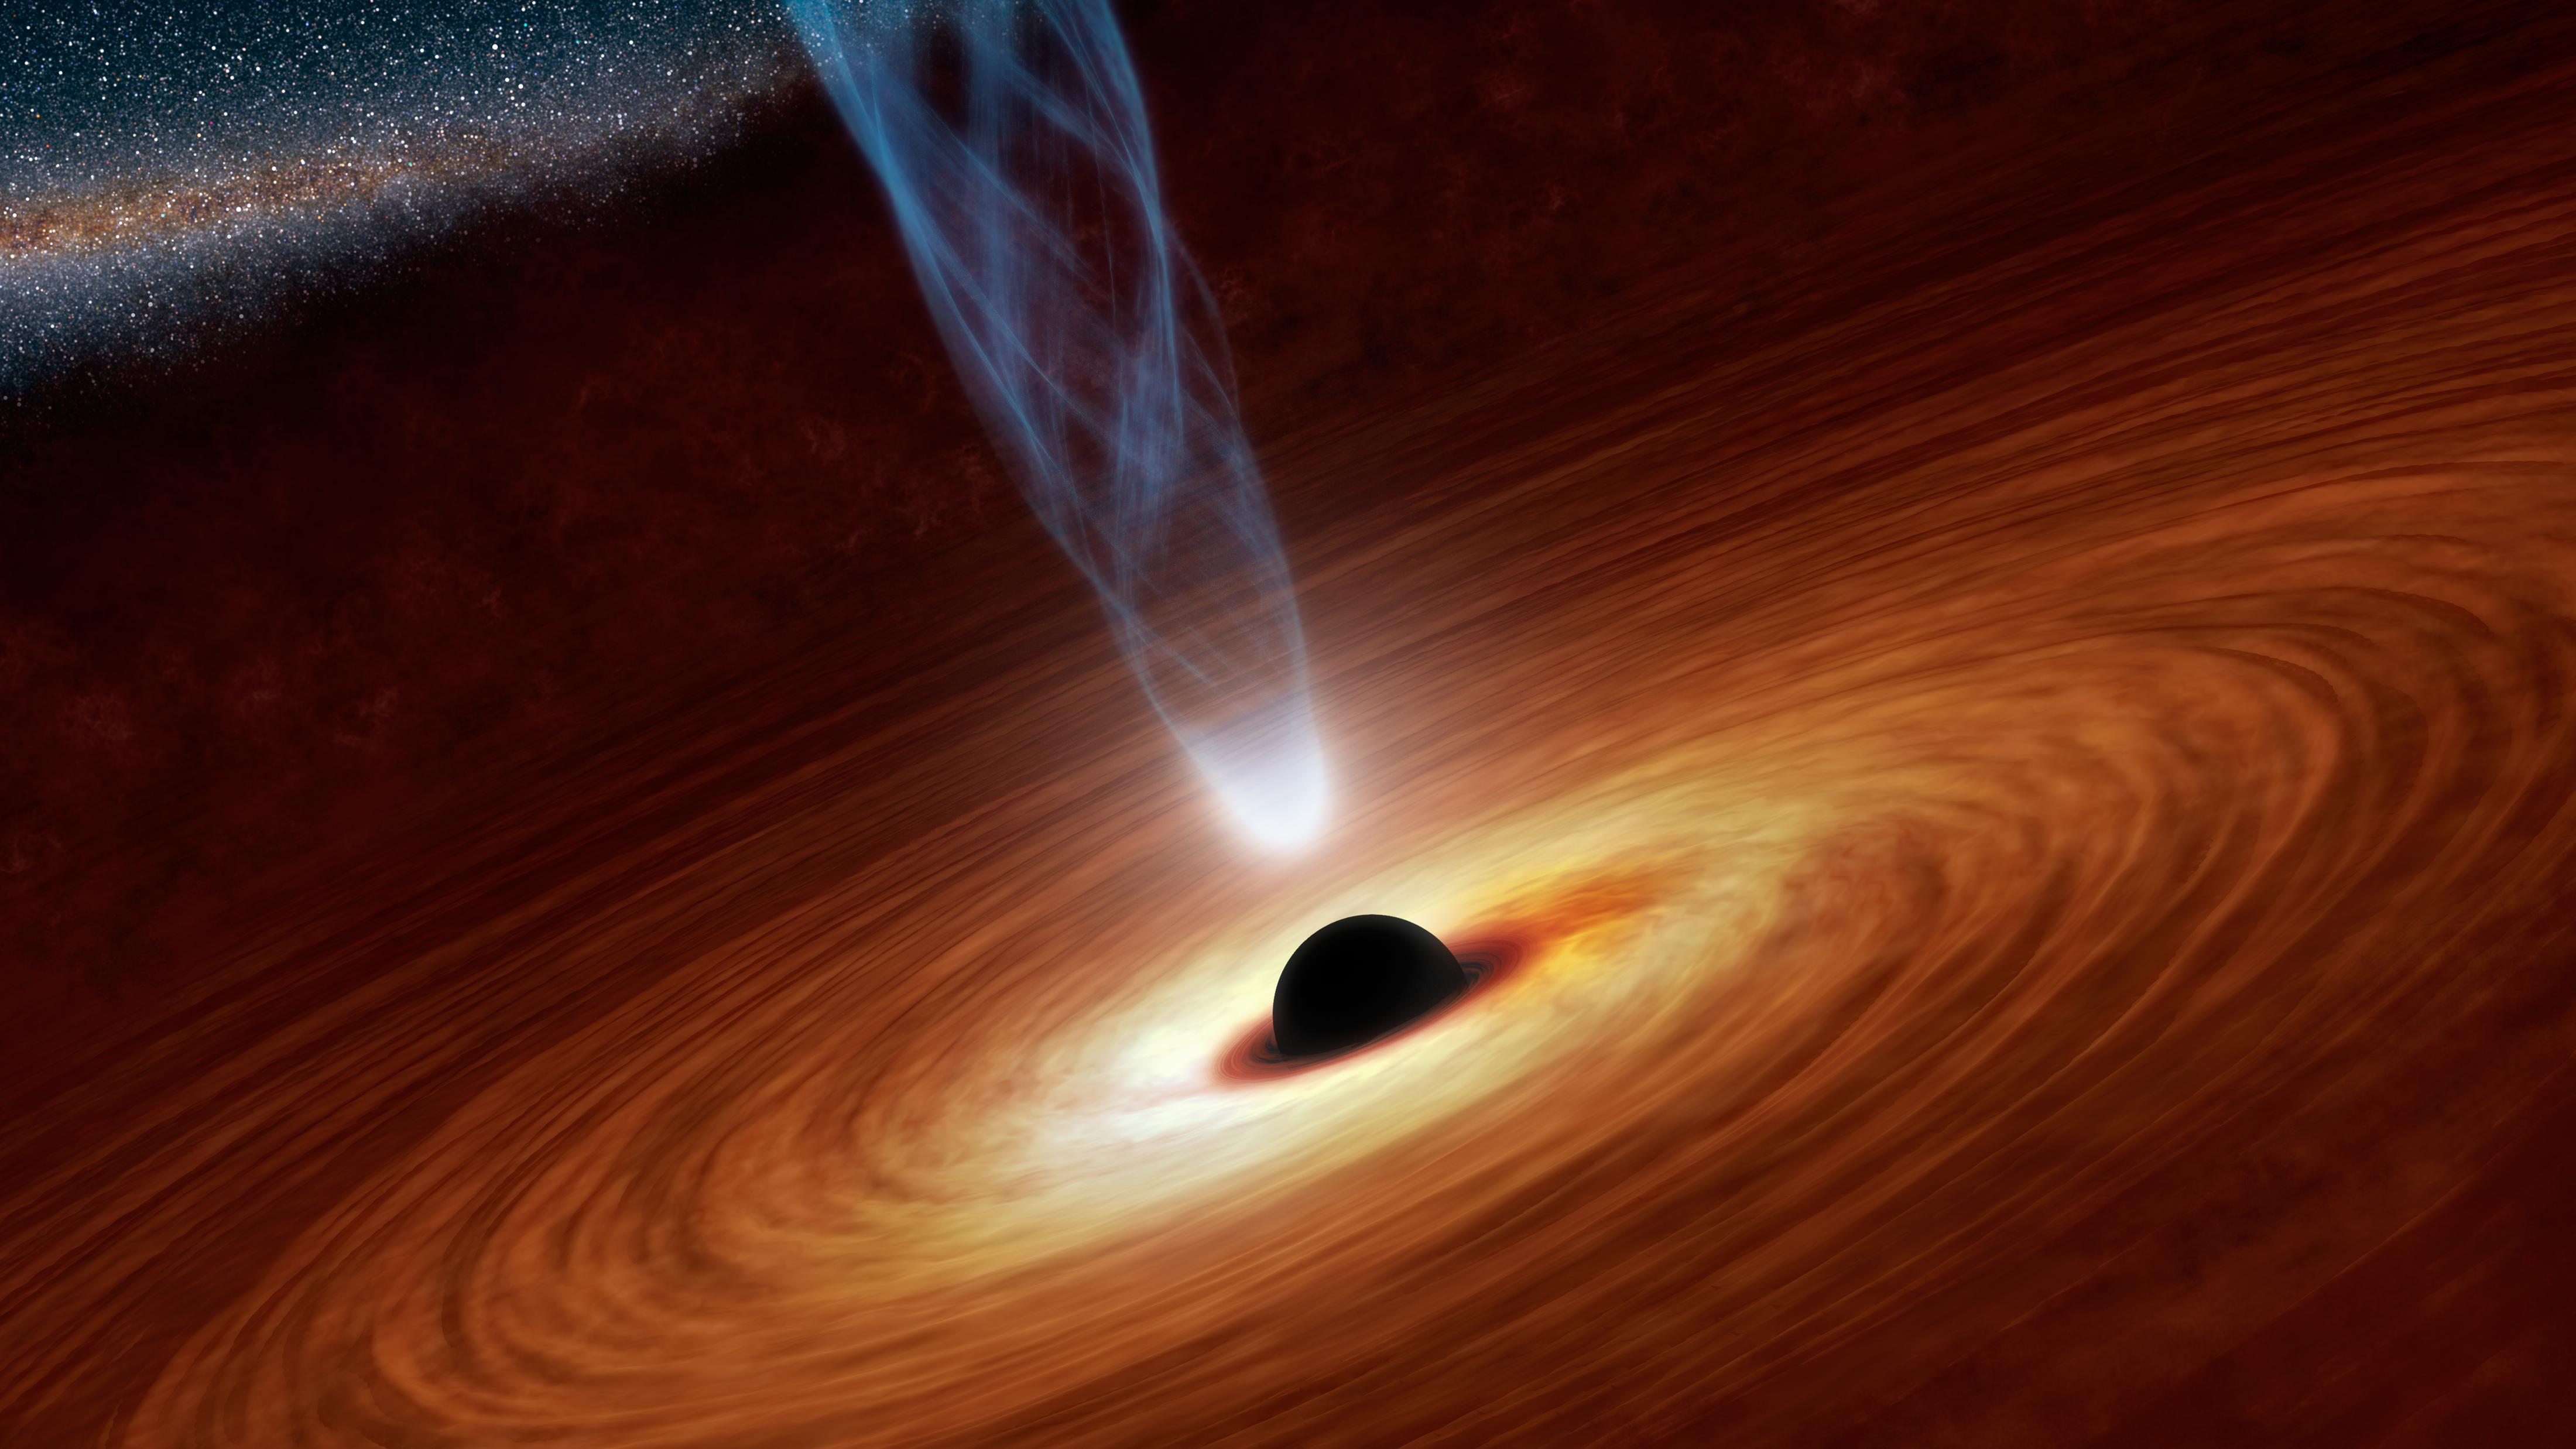 2020 Nobel Physics Winners Helped Find Black Holes | Time